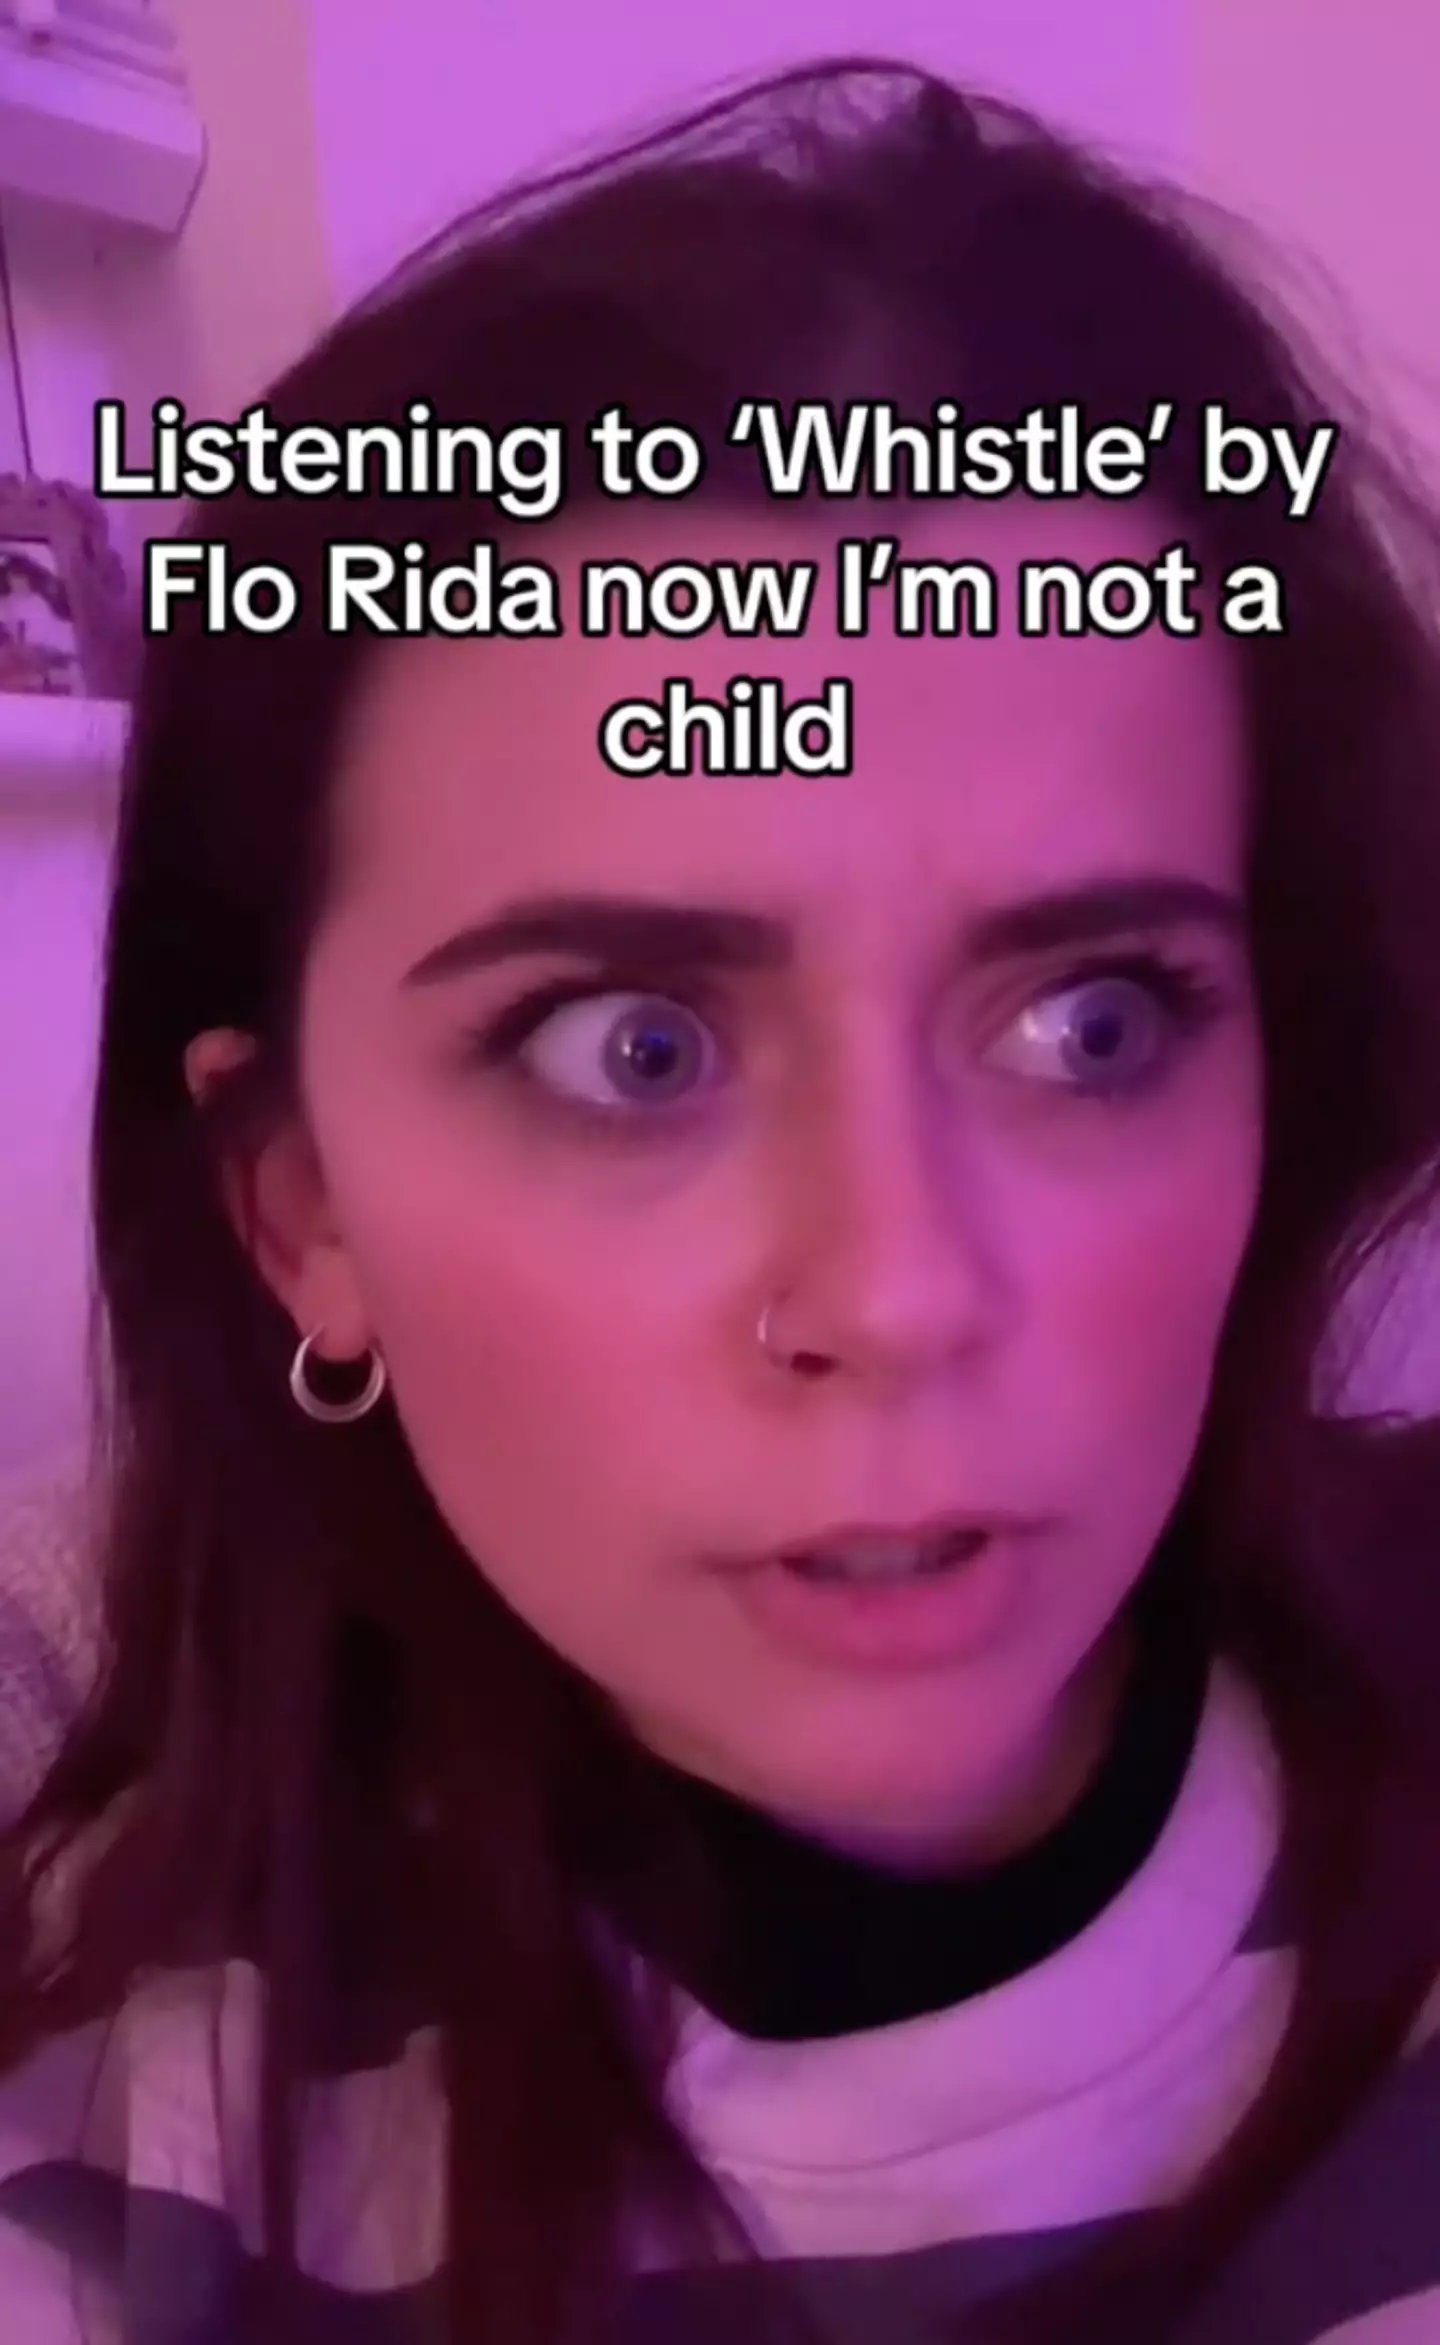 The TikTok user was shocked after really listening to the lyrics of Flo Rida's track.